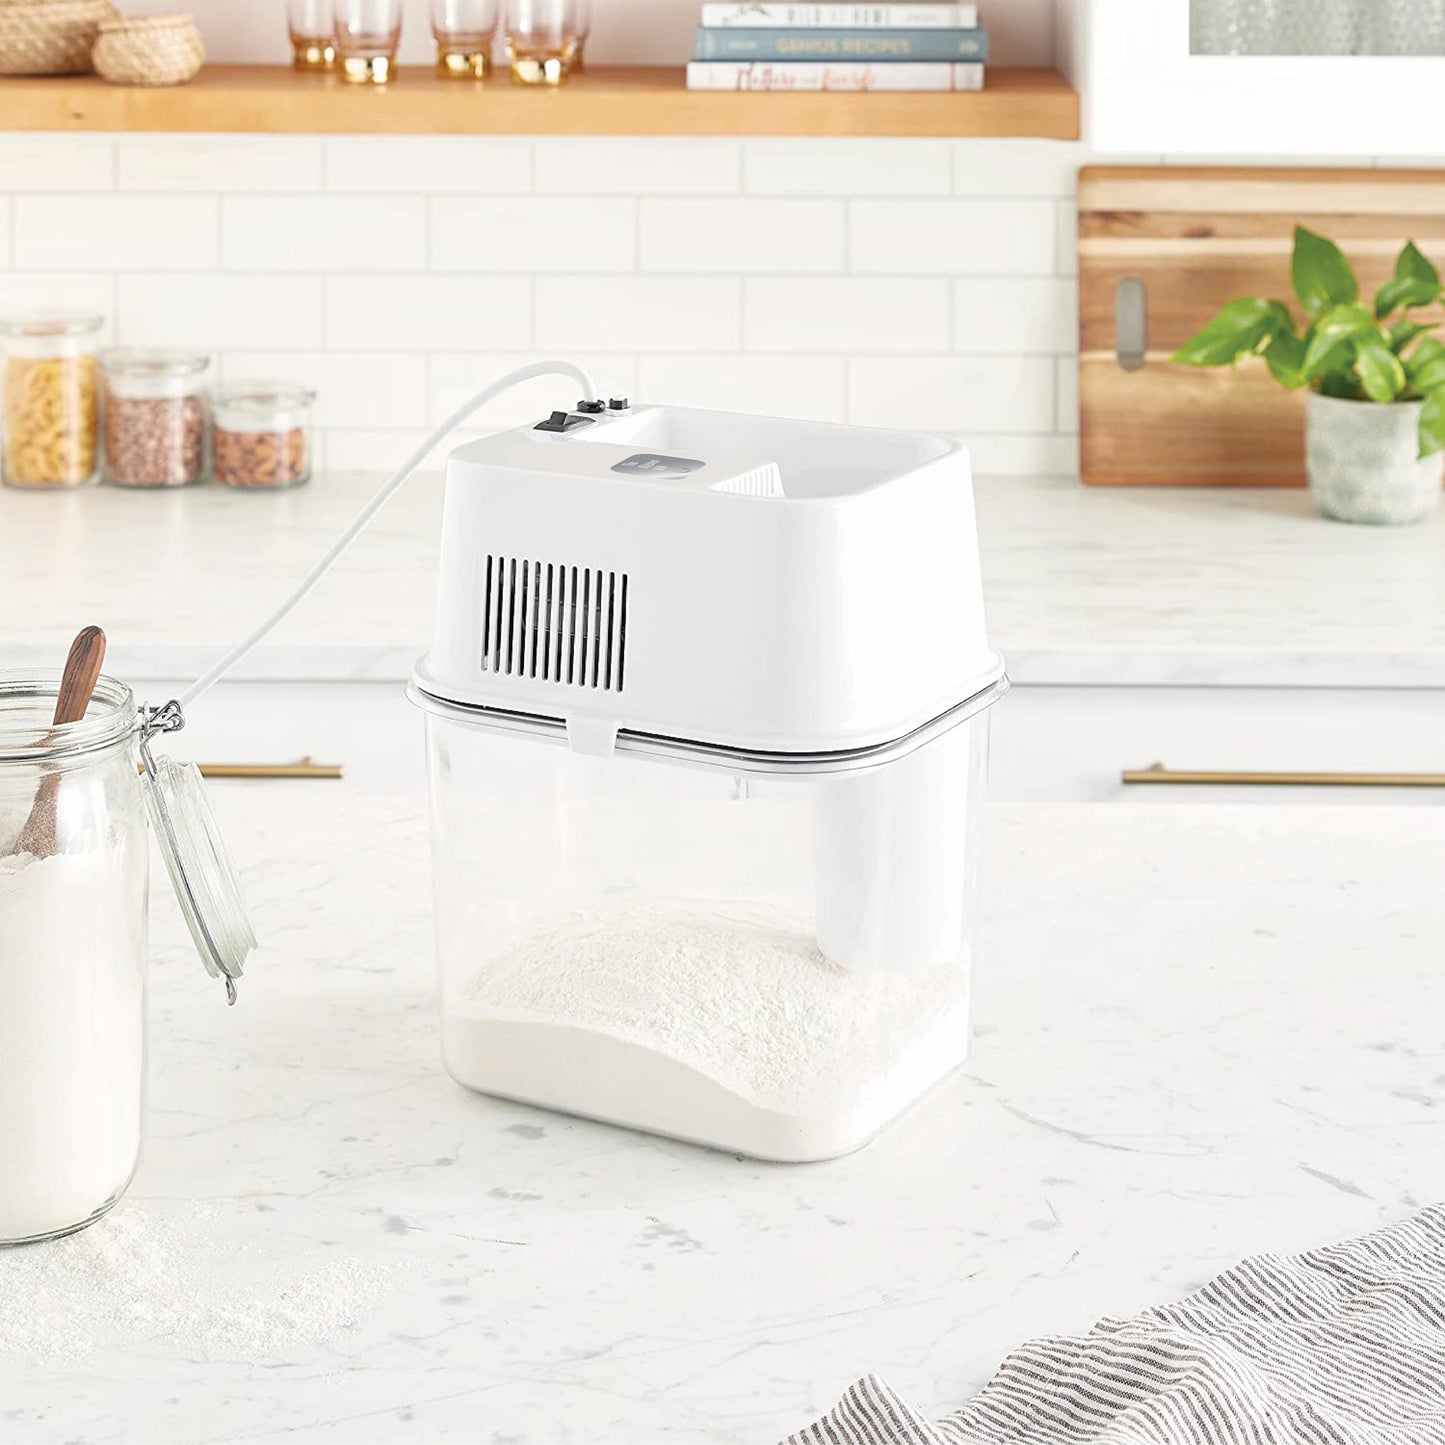 The Kitchen Mill - Electric Grain/Flour Mill - Assembled in the USA